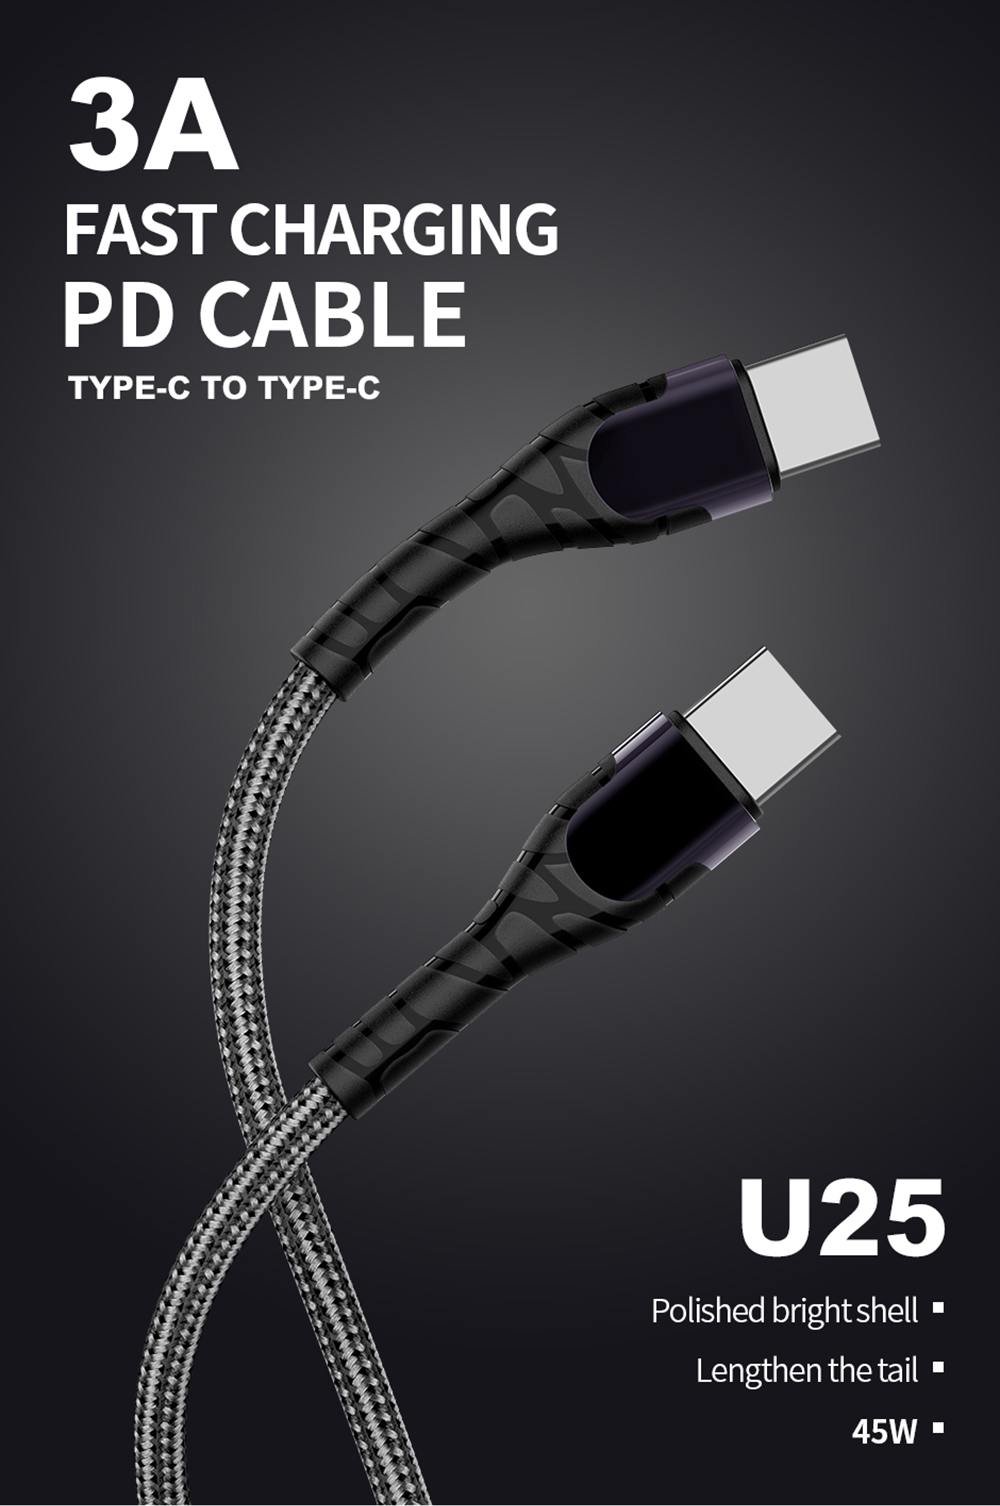 U25-type-c-pd-cable (1).jpg